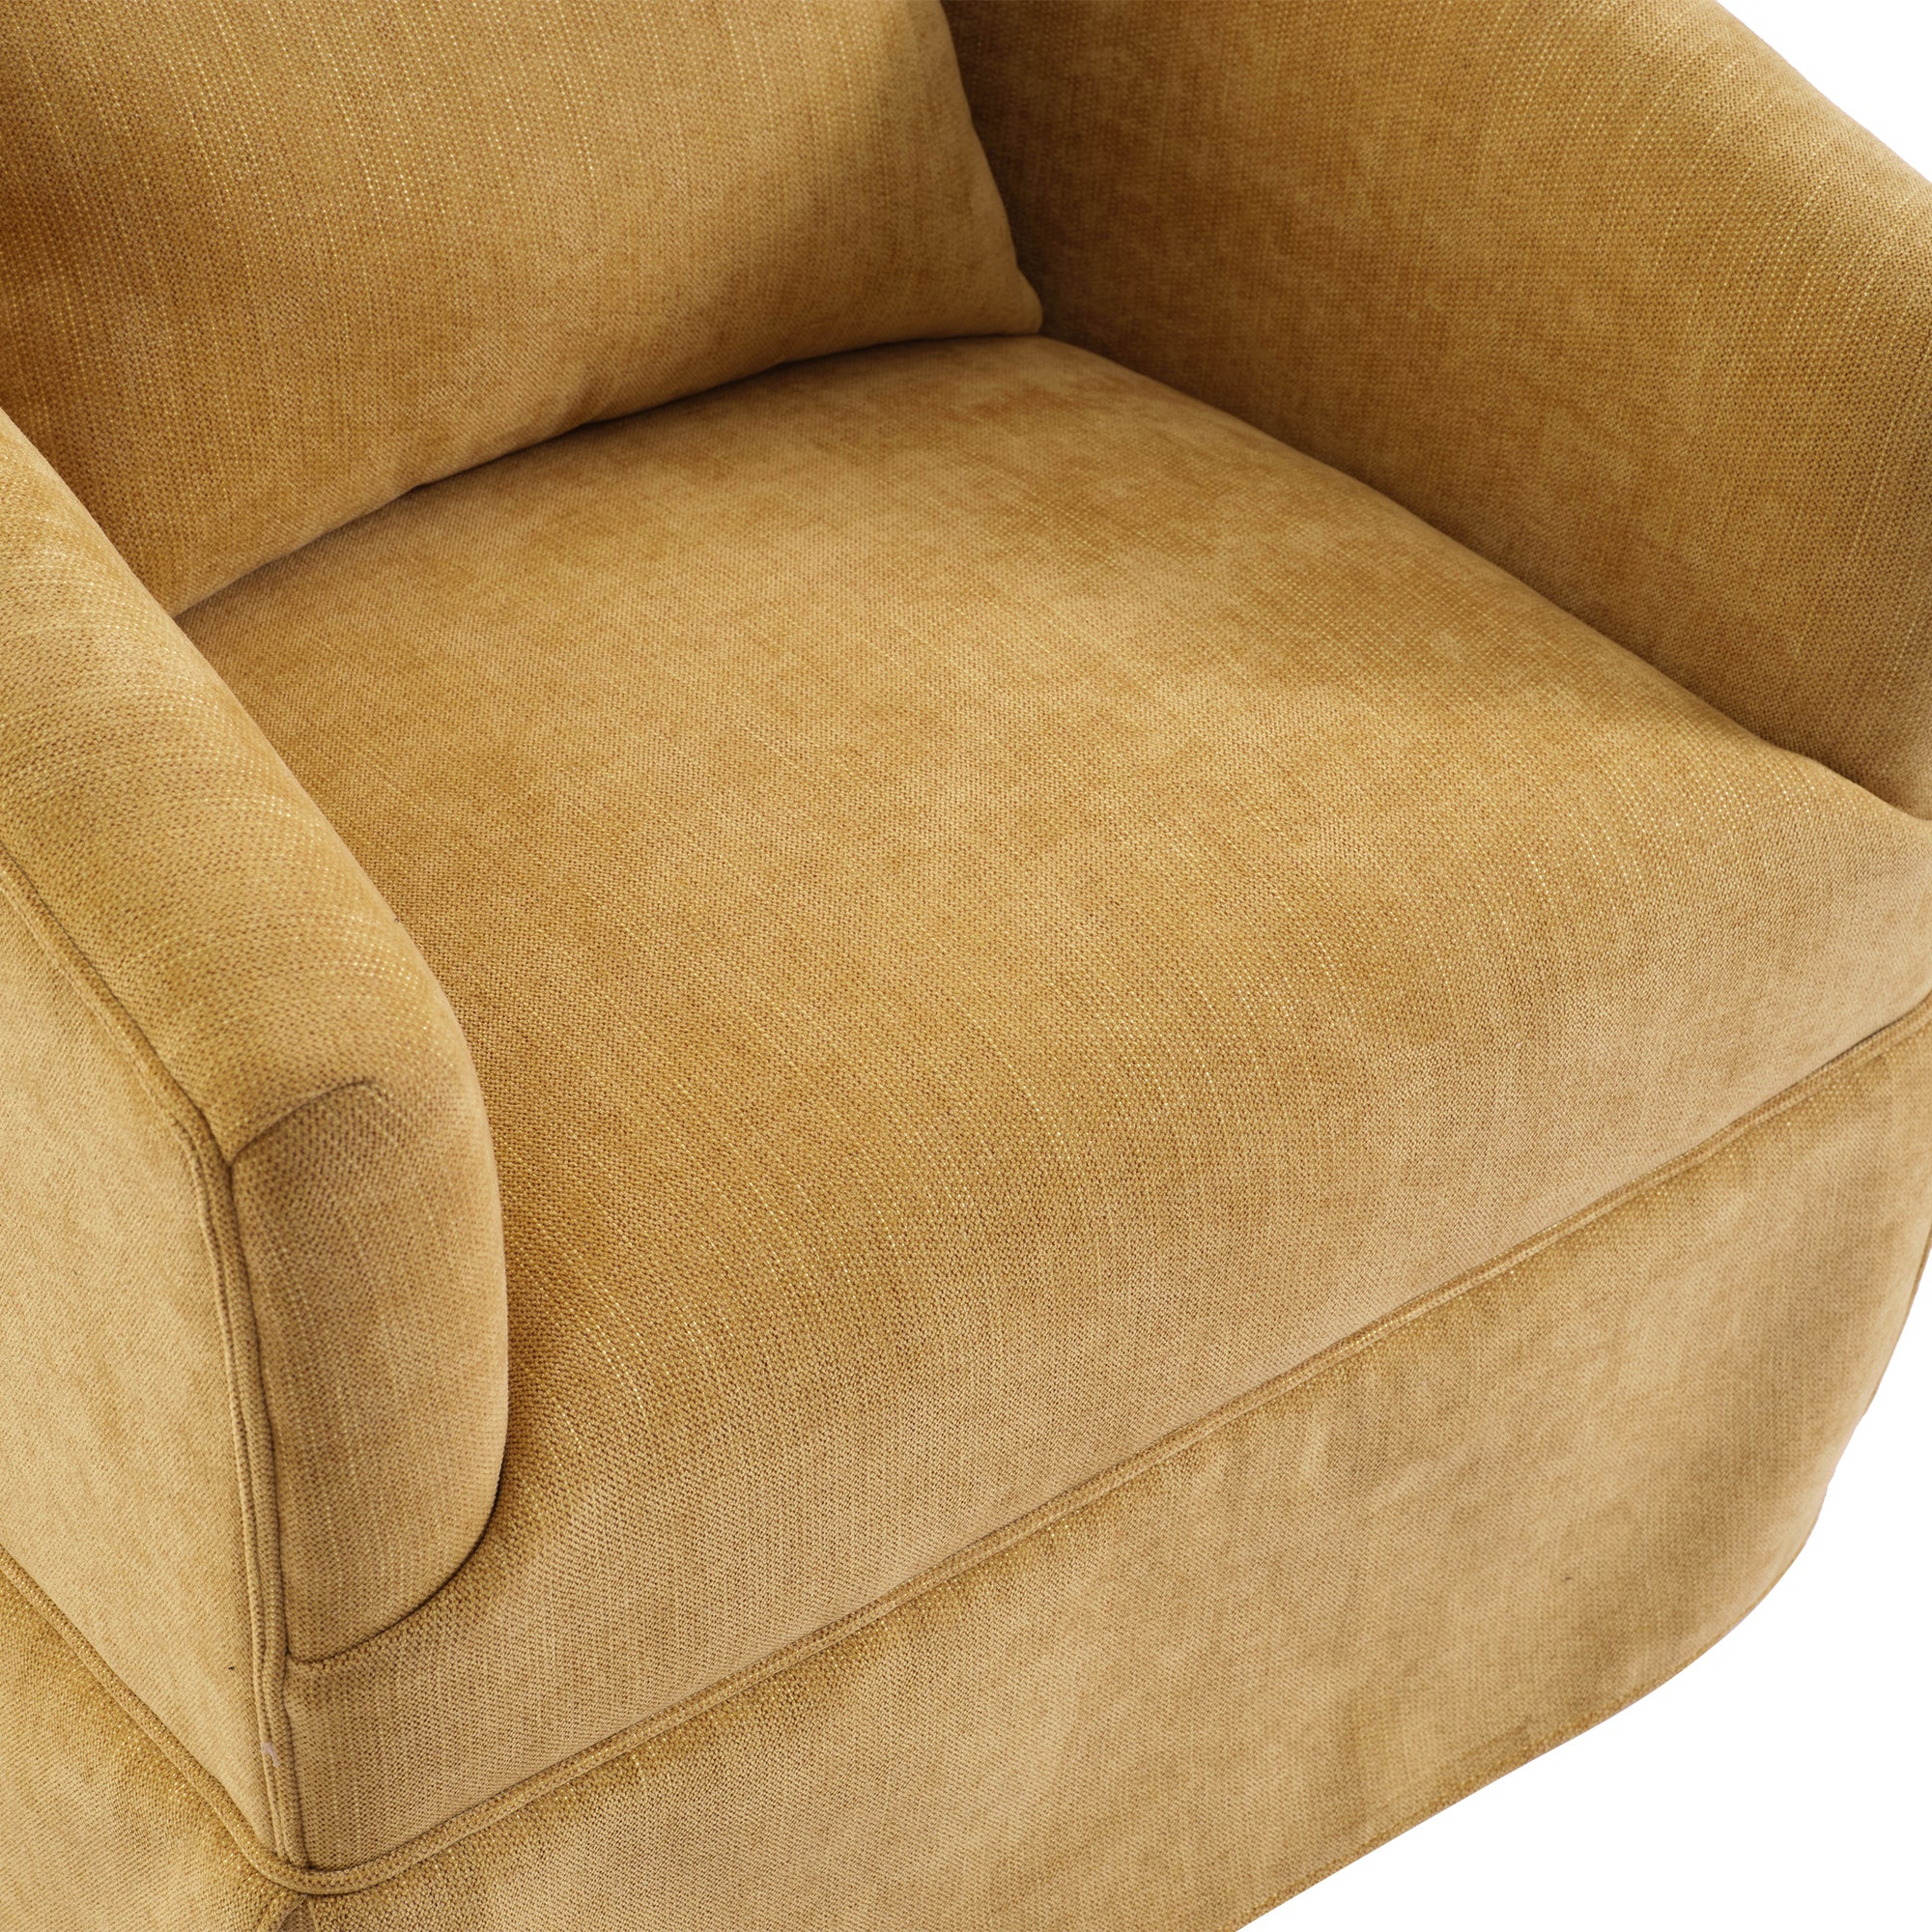 360 degree Swivel Accent Armchair Linen Blend MUSTED mustard yellow-upholstered